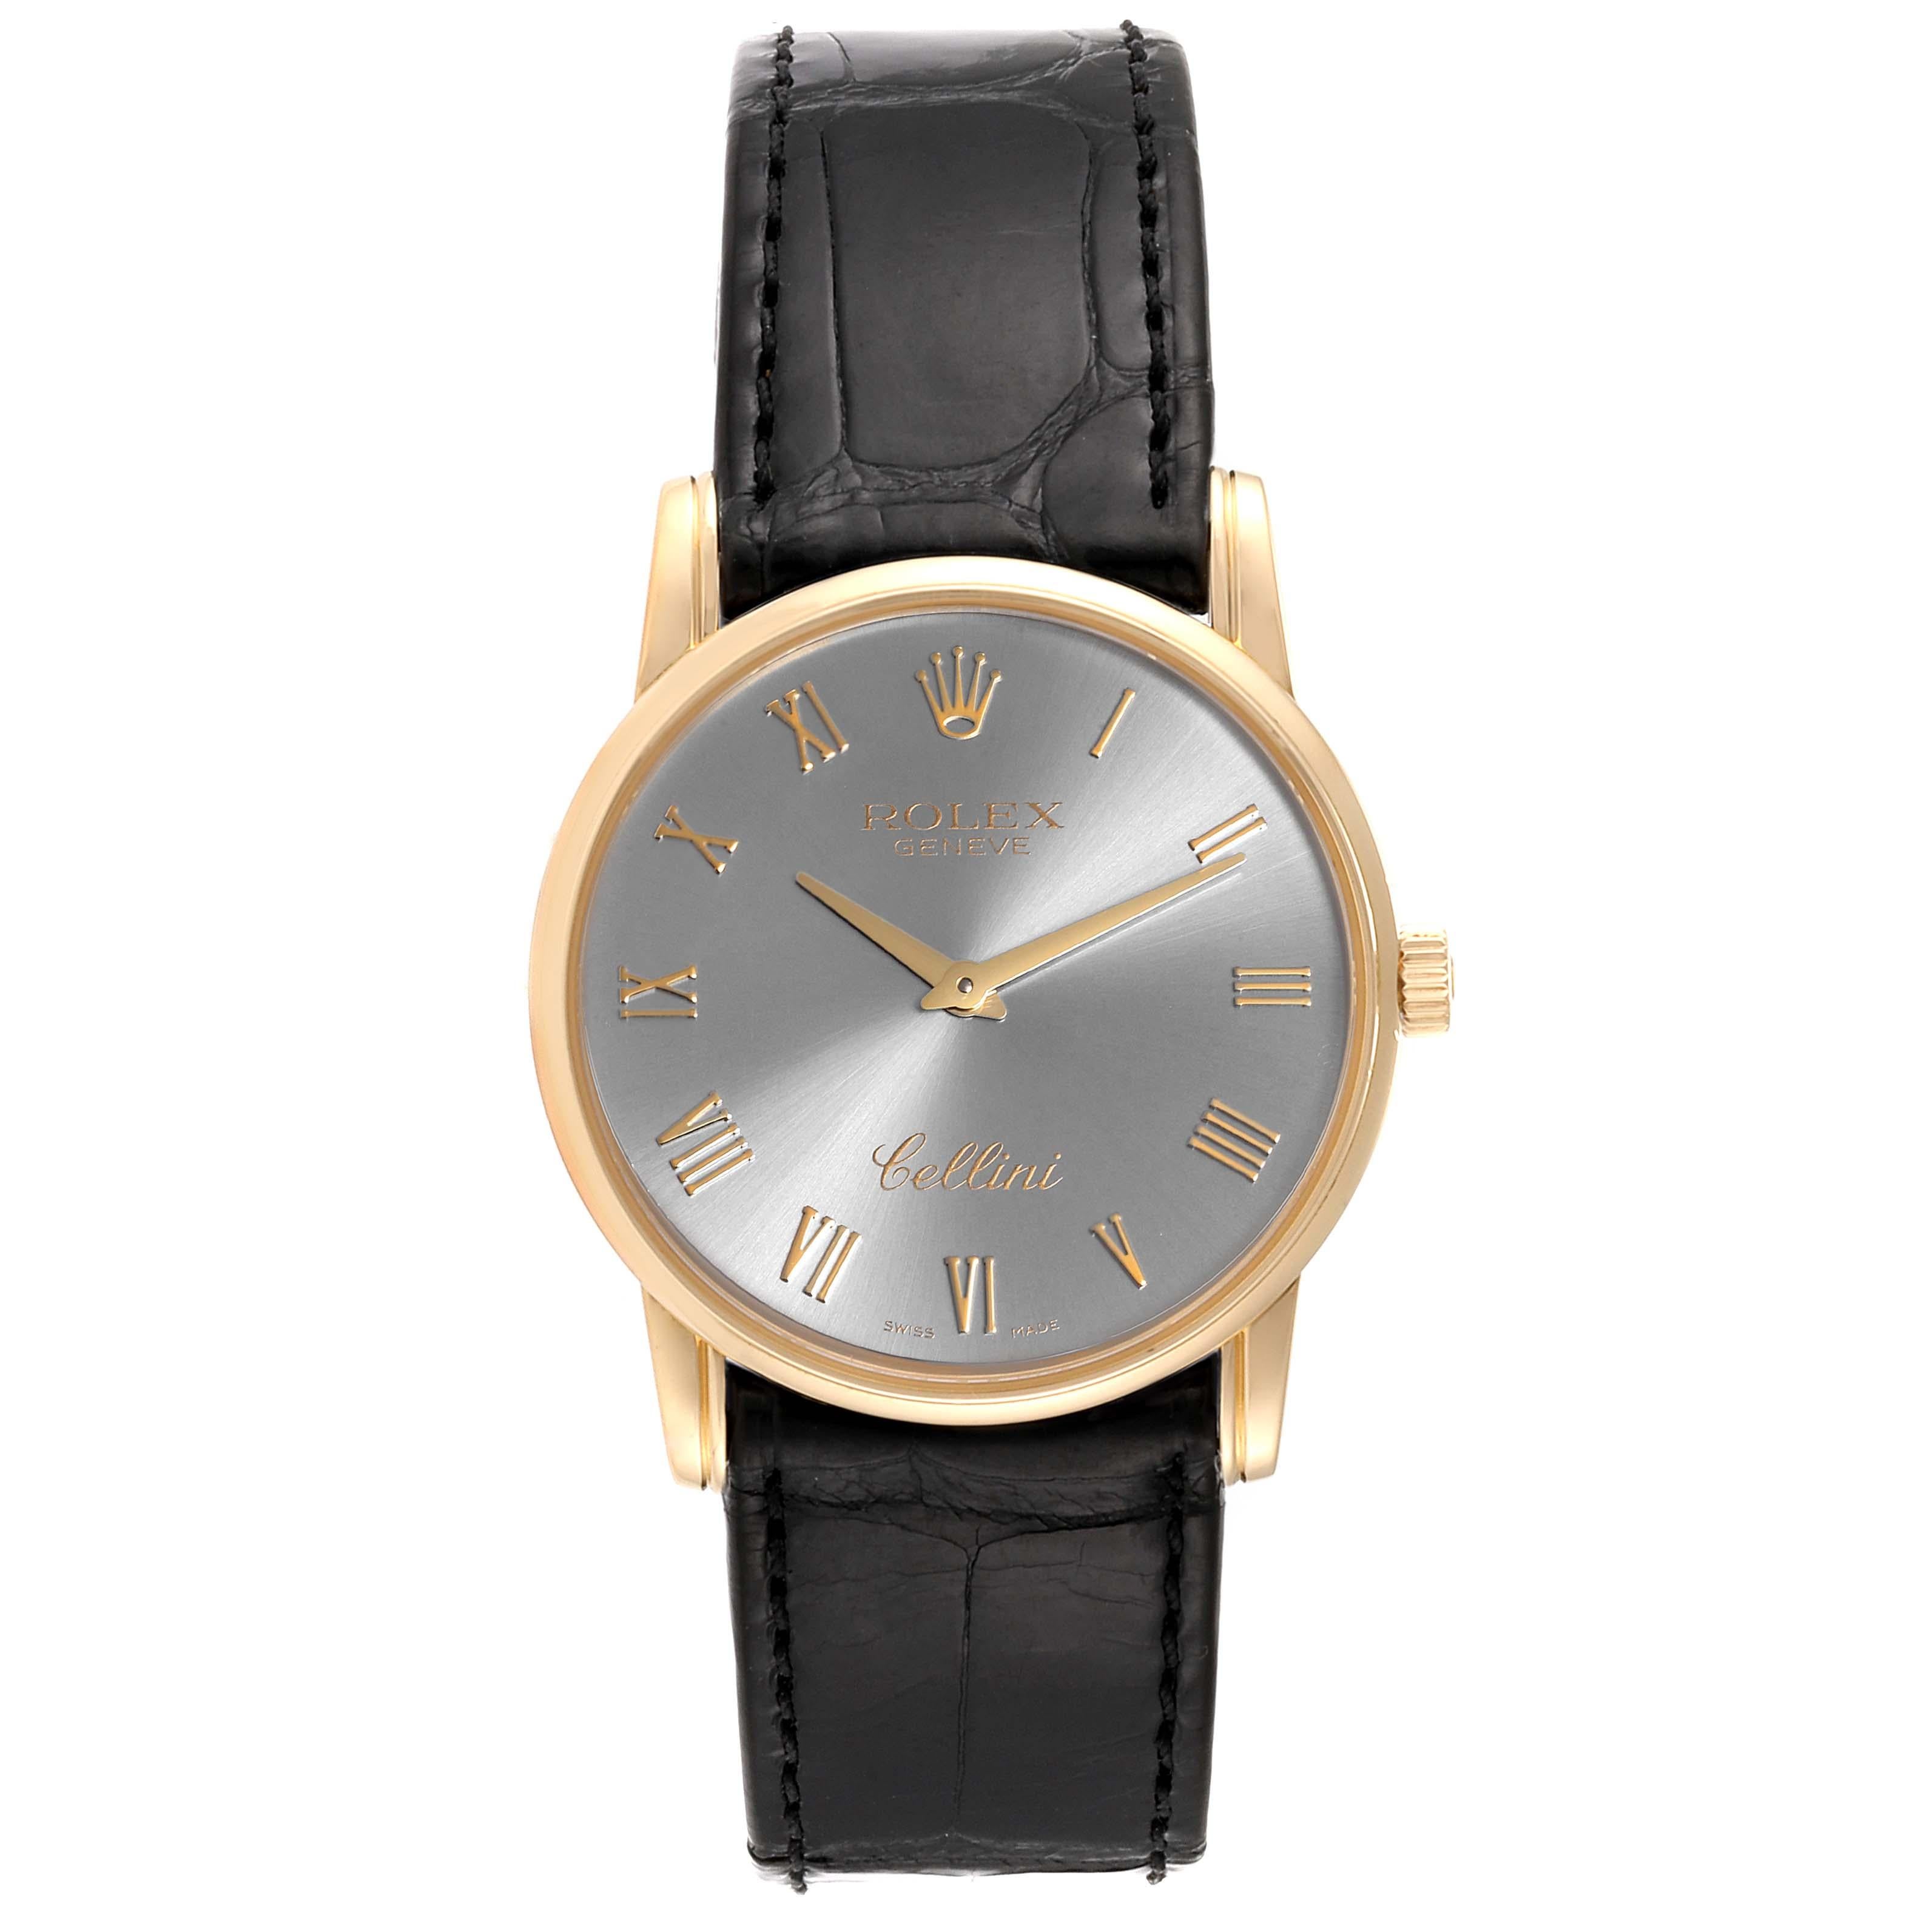 Rolex Cellini Classic Slate Dial 18k Gold Mens Watch 5116. Manually wind movement. 18k yellow gold slim case 31.8 x 5.5 mm in diameter. Rolex logo on a crown. . Scratch resistant sapphire crystal. Flat profile. Slate dial with raised gold roman